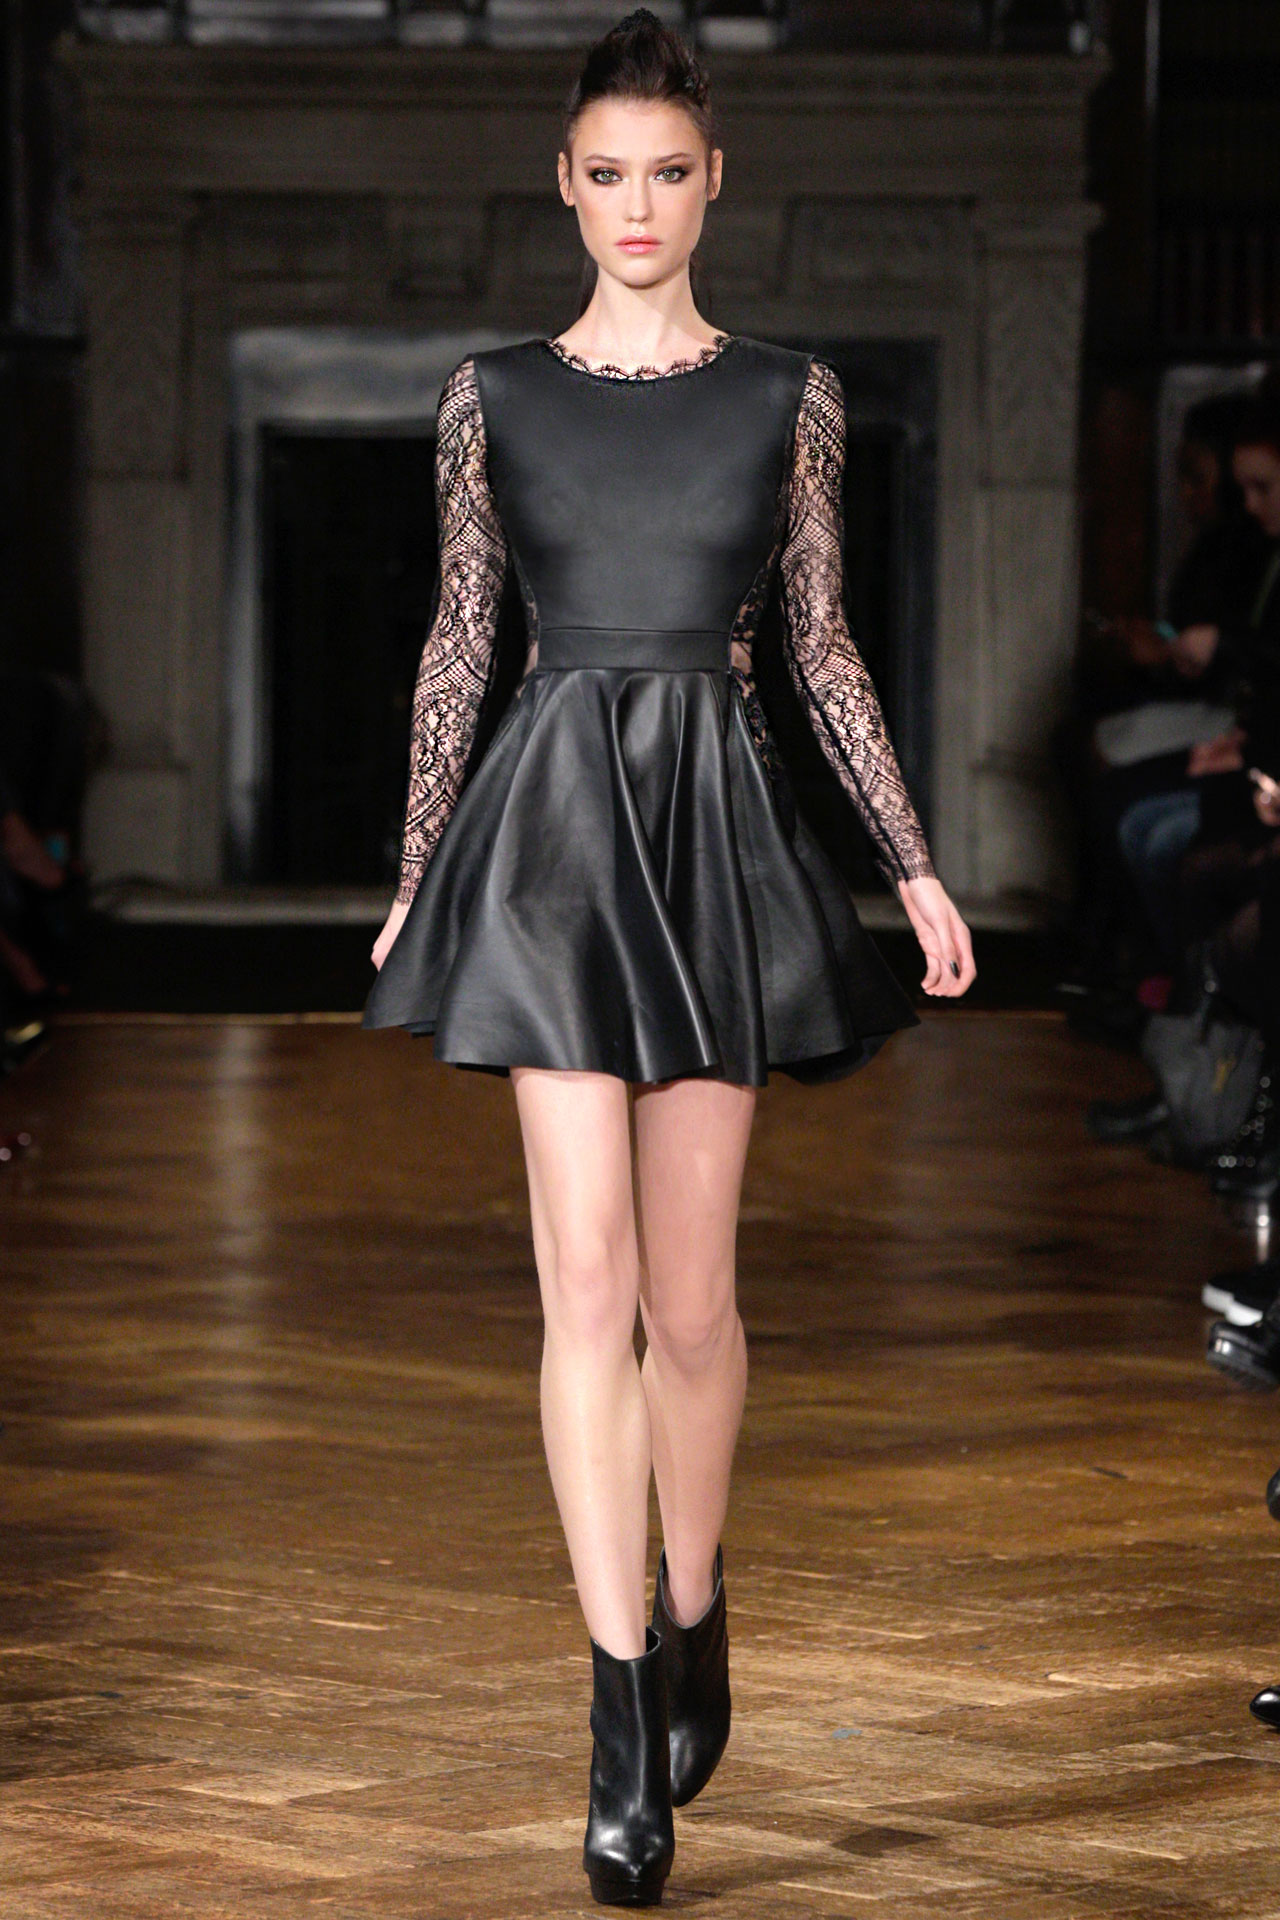 RUNWAY LOOKS - AUTUMN / WINTER 2013 - Collections